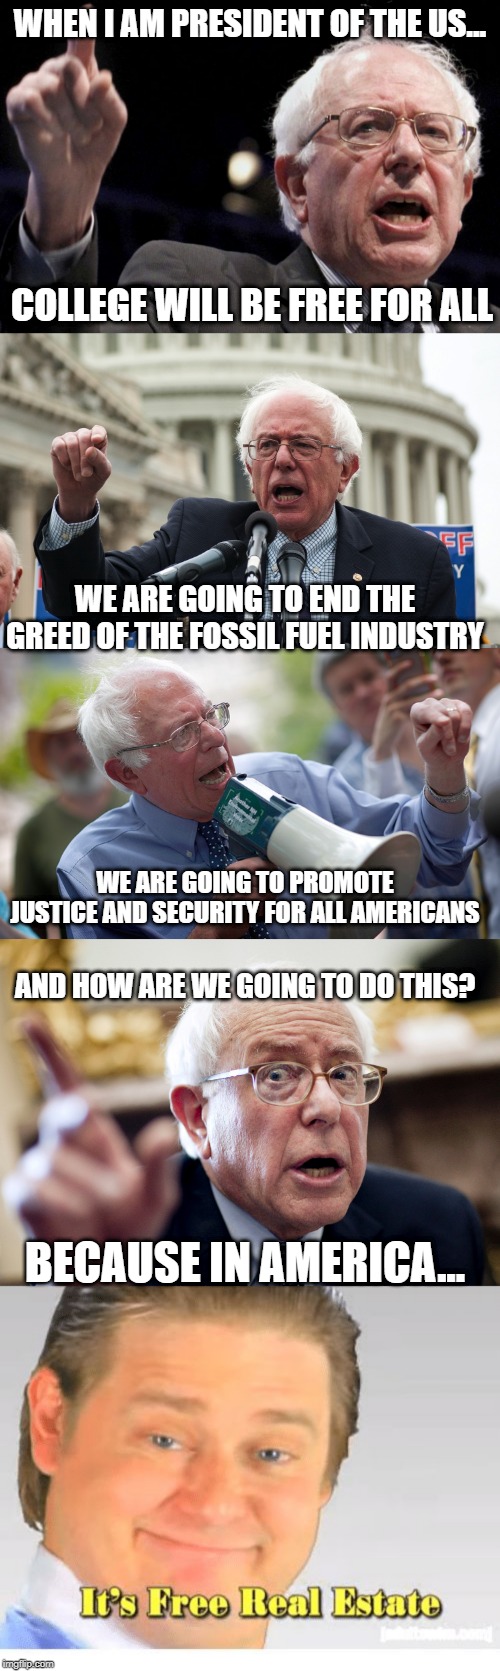 The Bernie Rant | WHEN I AM PRESIDENT OF THE US... COLLEGE WILL BE FREE FOR ALL; WE ARE GOING TO END THE GREED OF THE FOSSIL FUEL INDUSTRY; WE ARE GOING TO PROMOTE JUSTICE AND SECURITY FOR ALL AMERICANS; AND HOW ARE WE GOING TO DO THIS? BECAUSE IN AMERICA... | image tagged in bernie sanders,it's free real estate | made w/ Imgflip meme maker